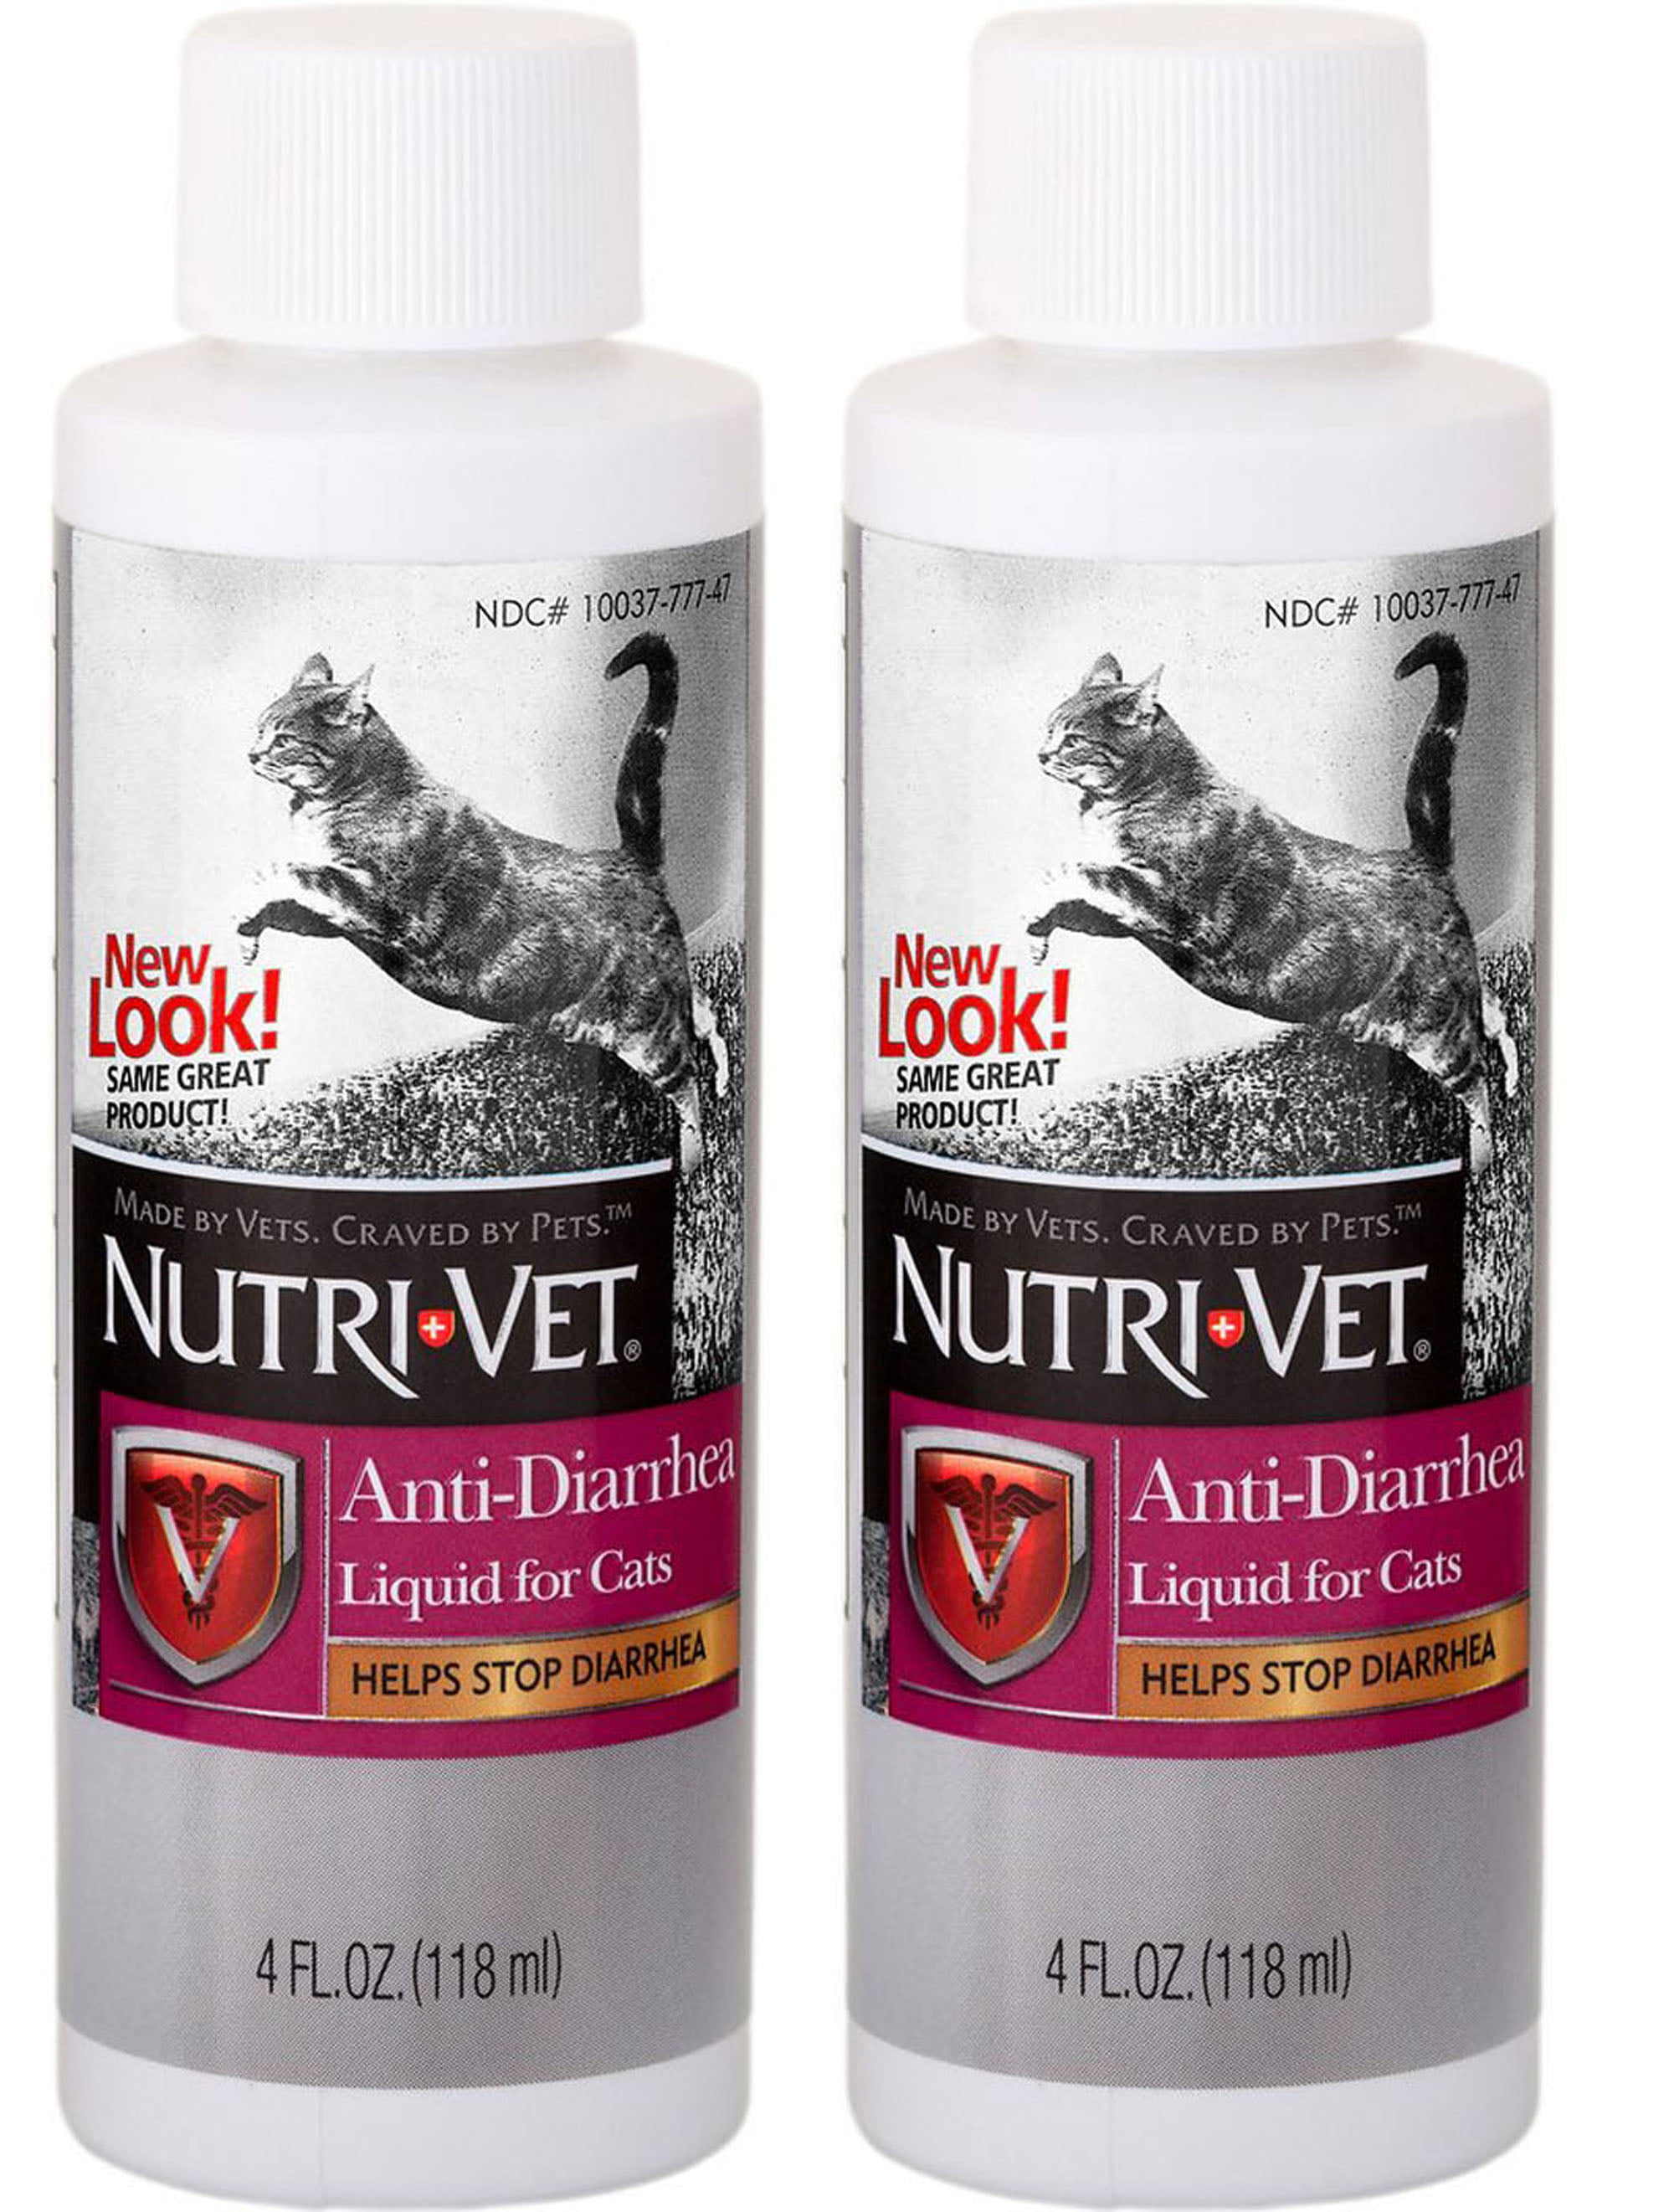 Anti Diarrhea for Cats 2 PACK Helps Stop Diarrhea Total of 8 oz Made in